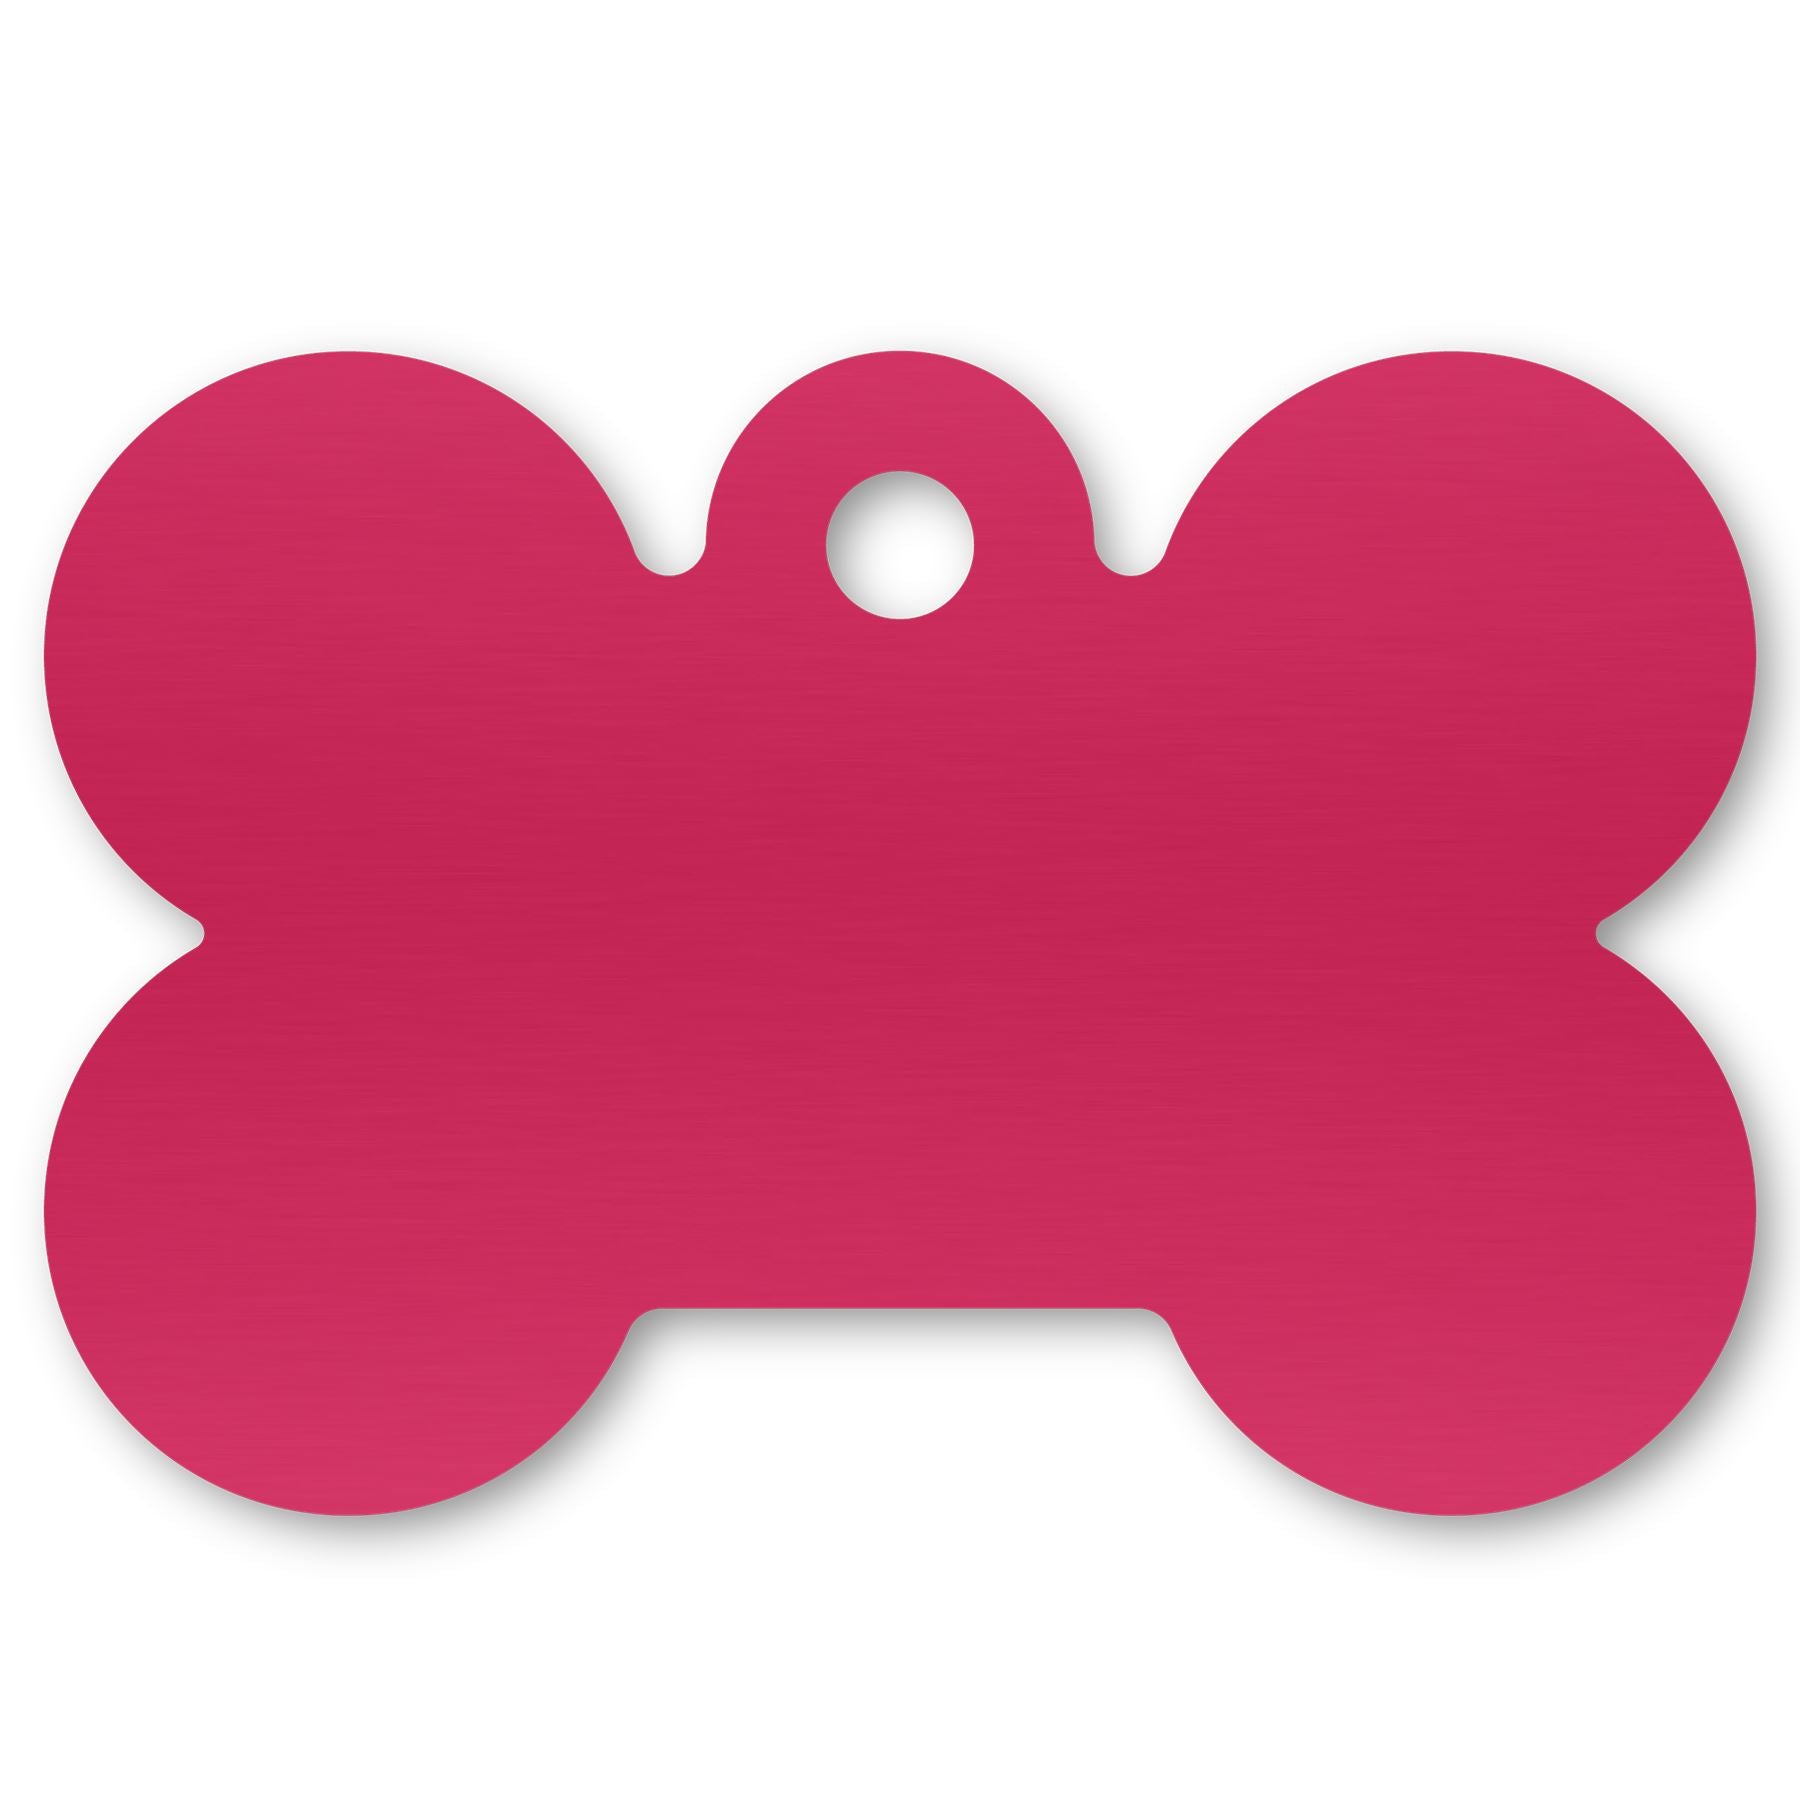 Anodized Aluminum Dog Bone Shaped Tags, 1-1/16" x 1-9/16" with 1/8" Hole, Laser Engraved Metal Tags Craftworks NW Pink 